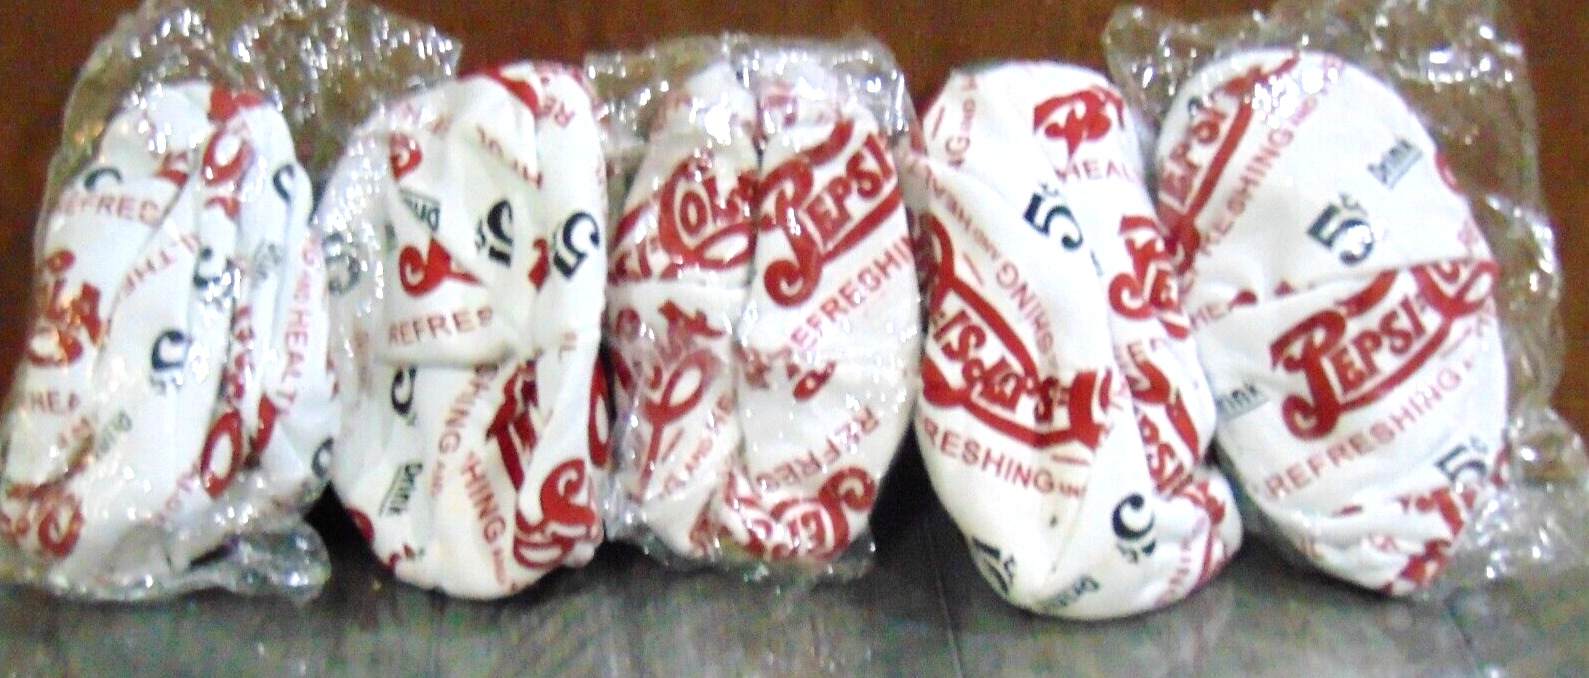 Unique Brand New Pepsi Cola Branded Promotional Blow Up Ball Covers Lot of 5